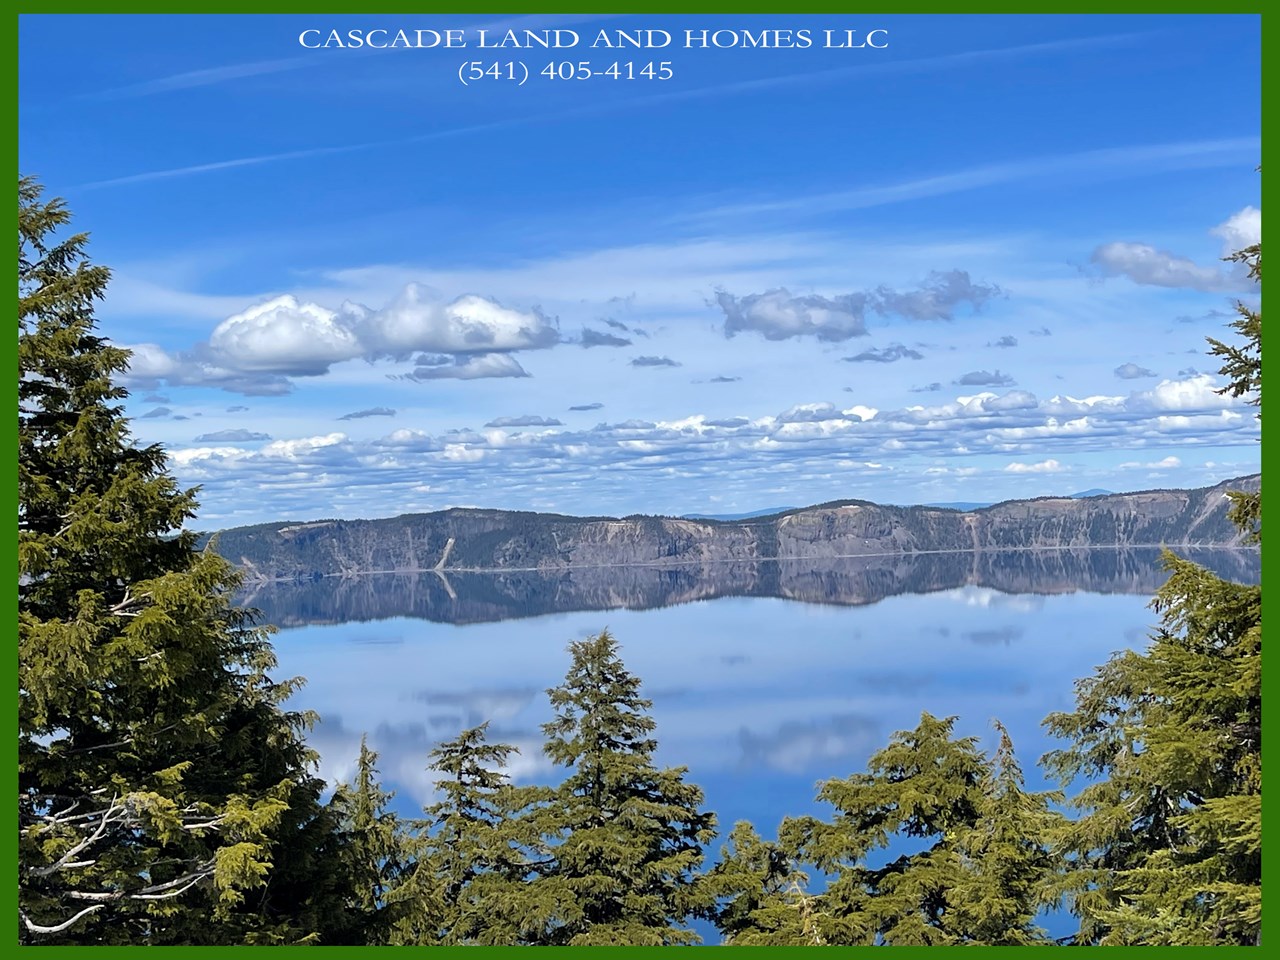 crater lake national park is just an hour away and is breathtakingly beautiful!  the nearby cascade mountains offer unlimited winter recreation! skiing and snowboarding in the winter months are nearby at the willamette pass or mt. bachelor.